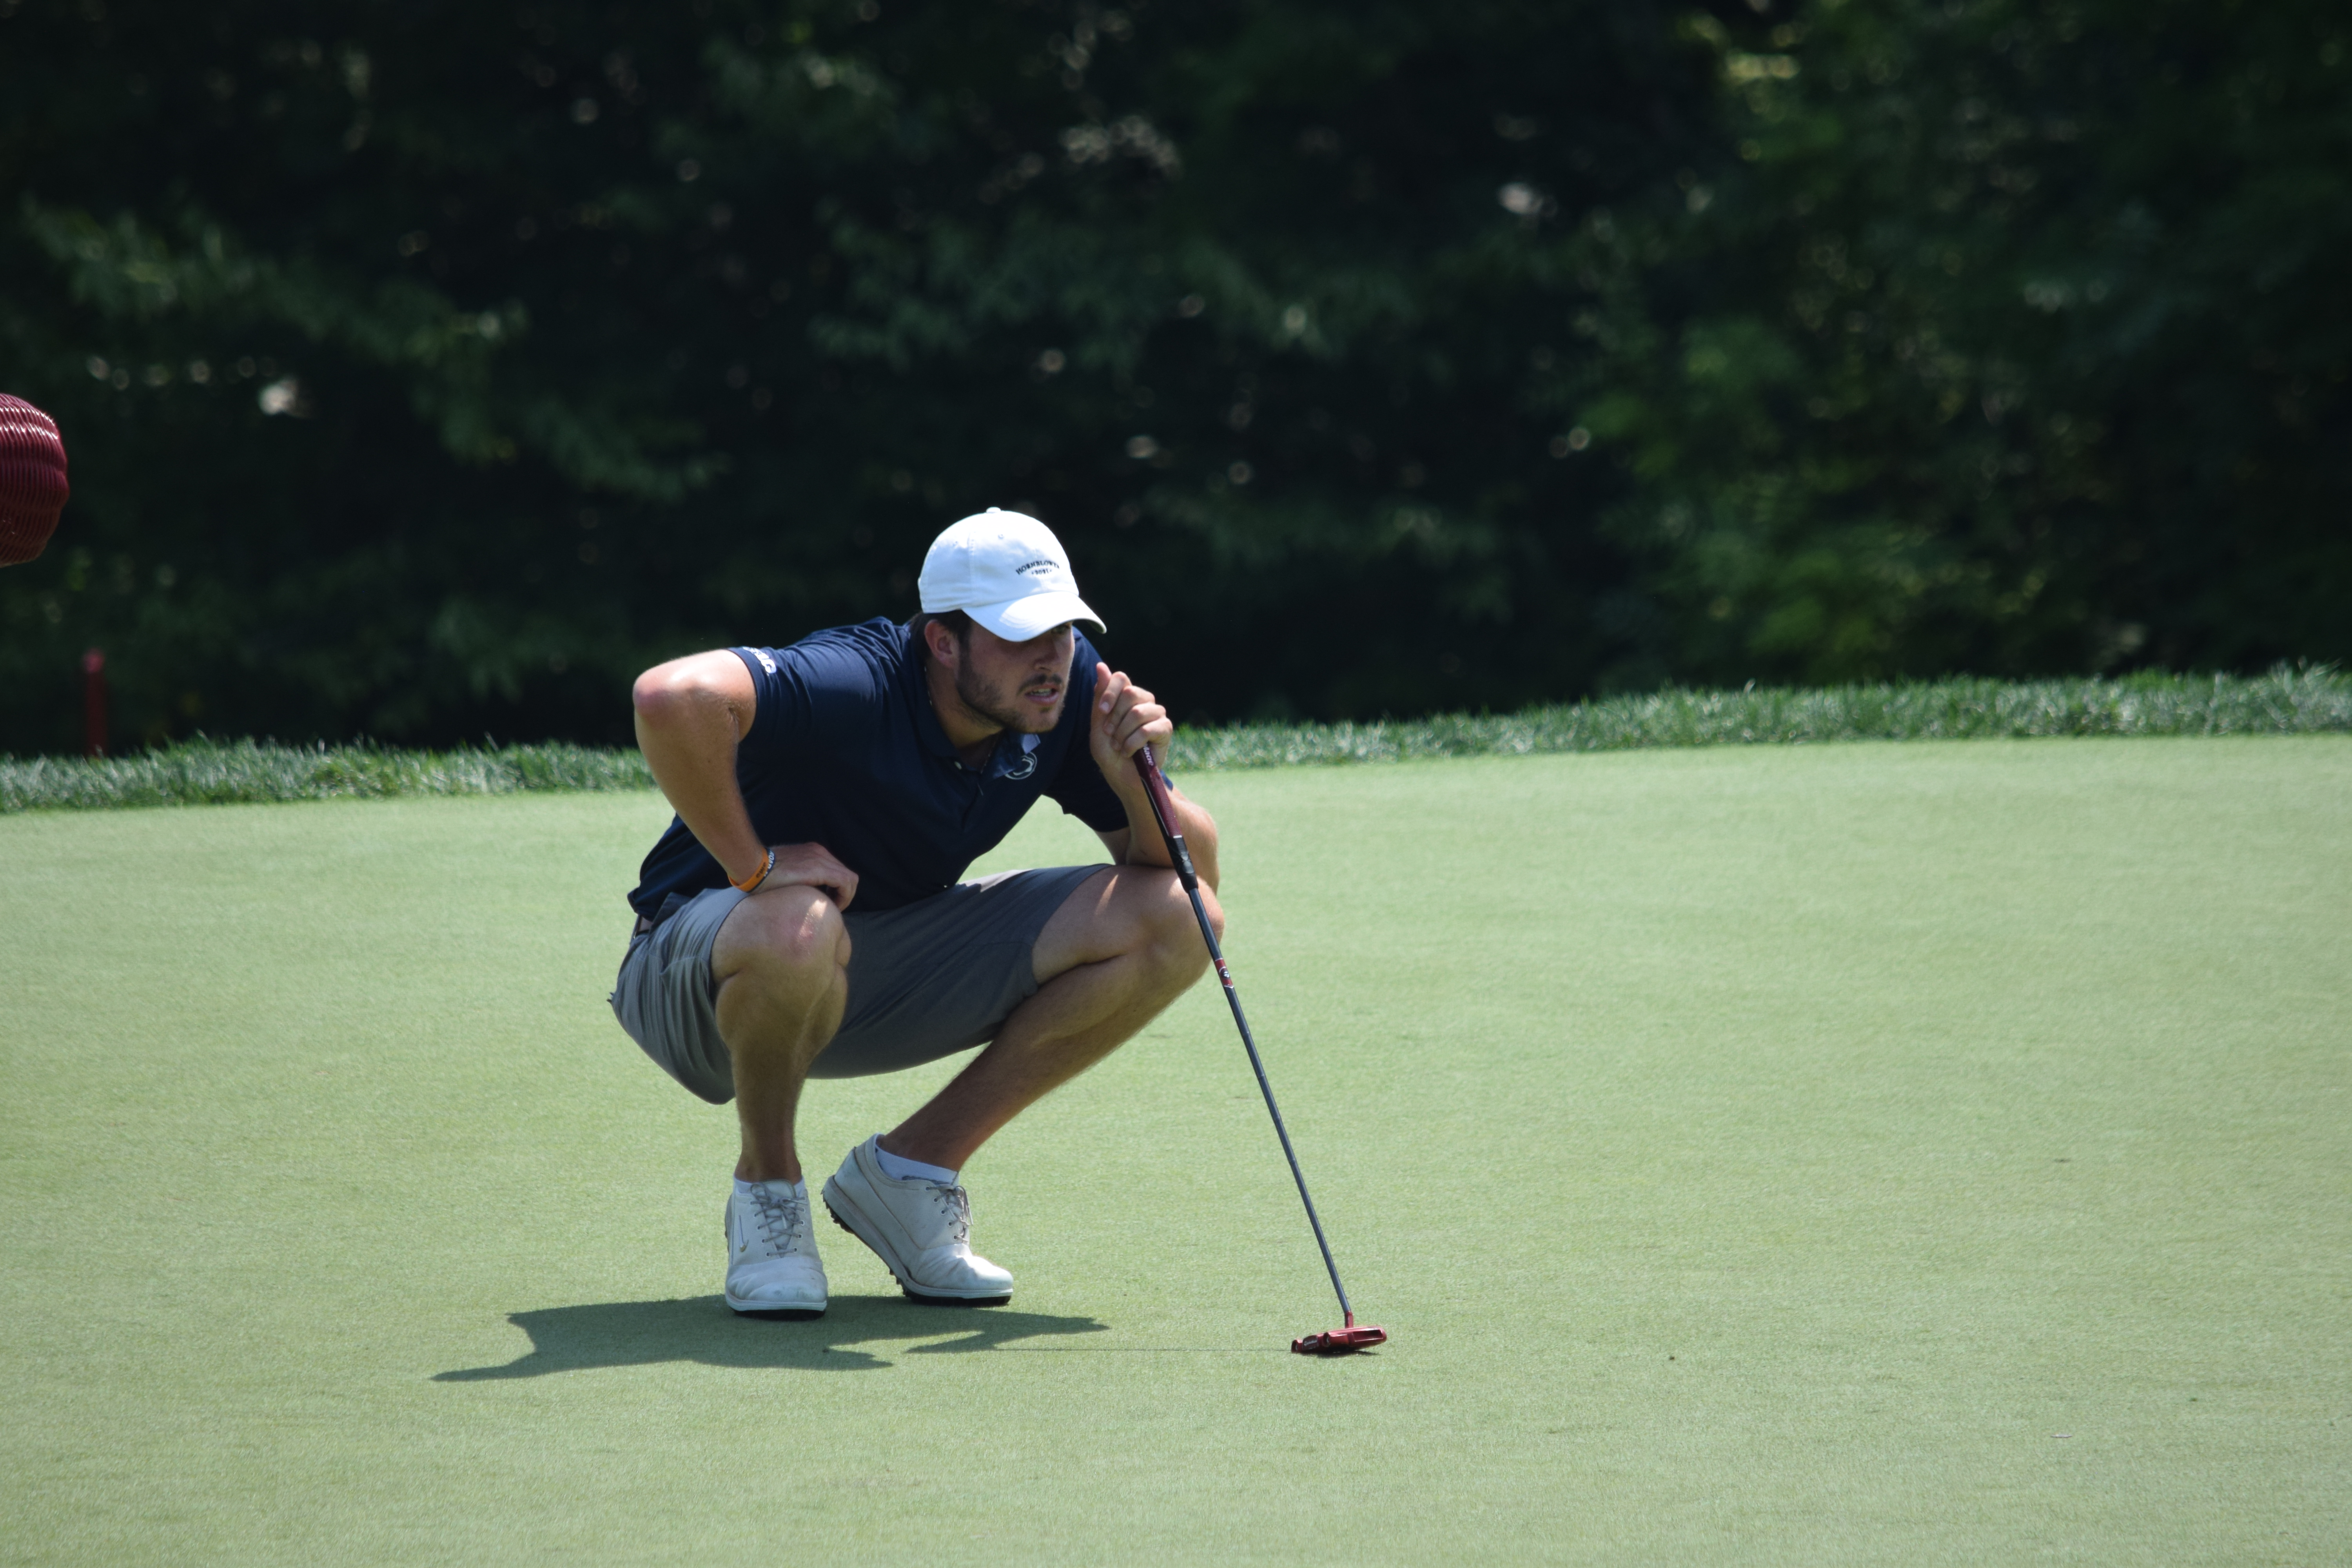 Philly Golf Penn States Patrick Sheehan leads Pennsylvania Amateur Championship after two rounds picture image